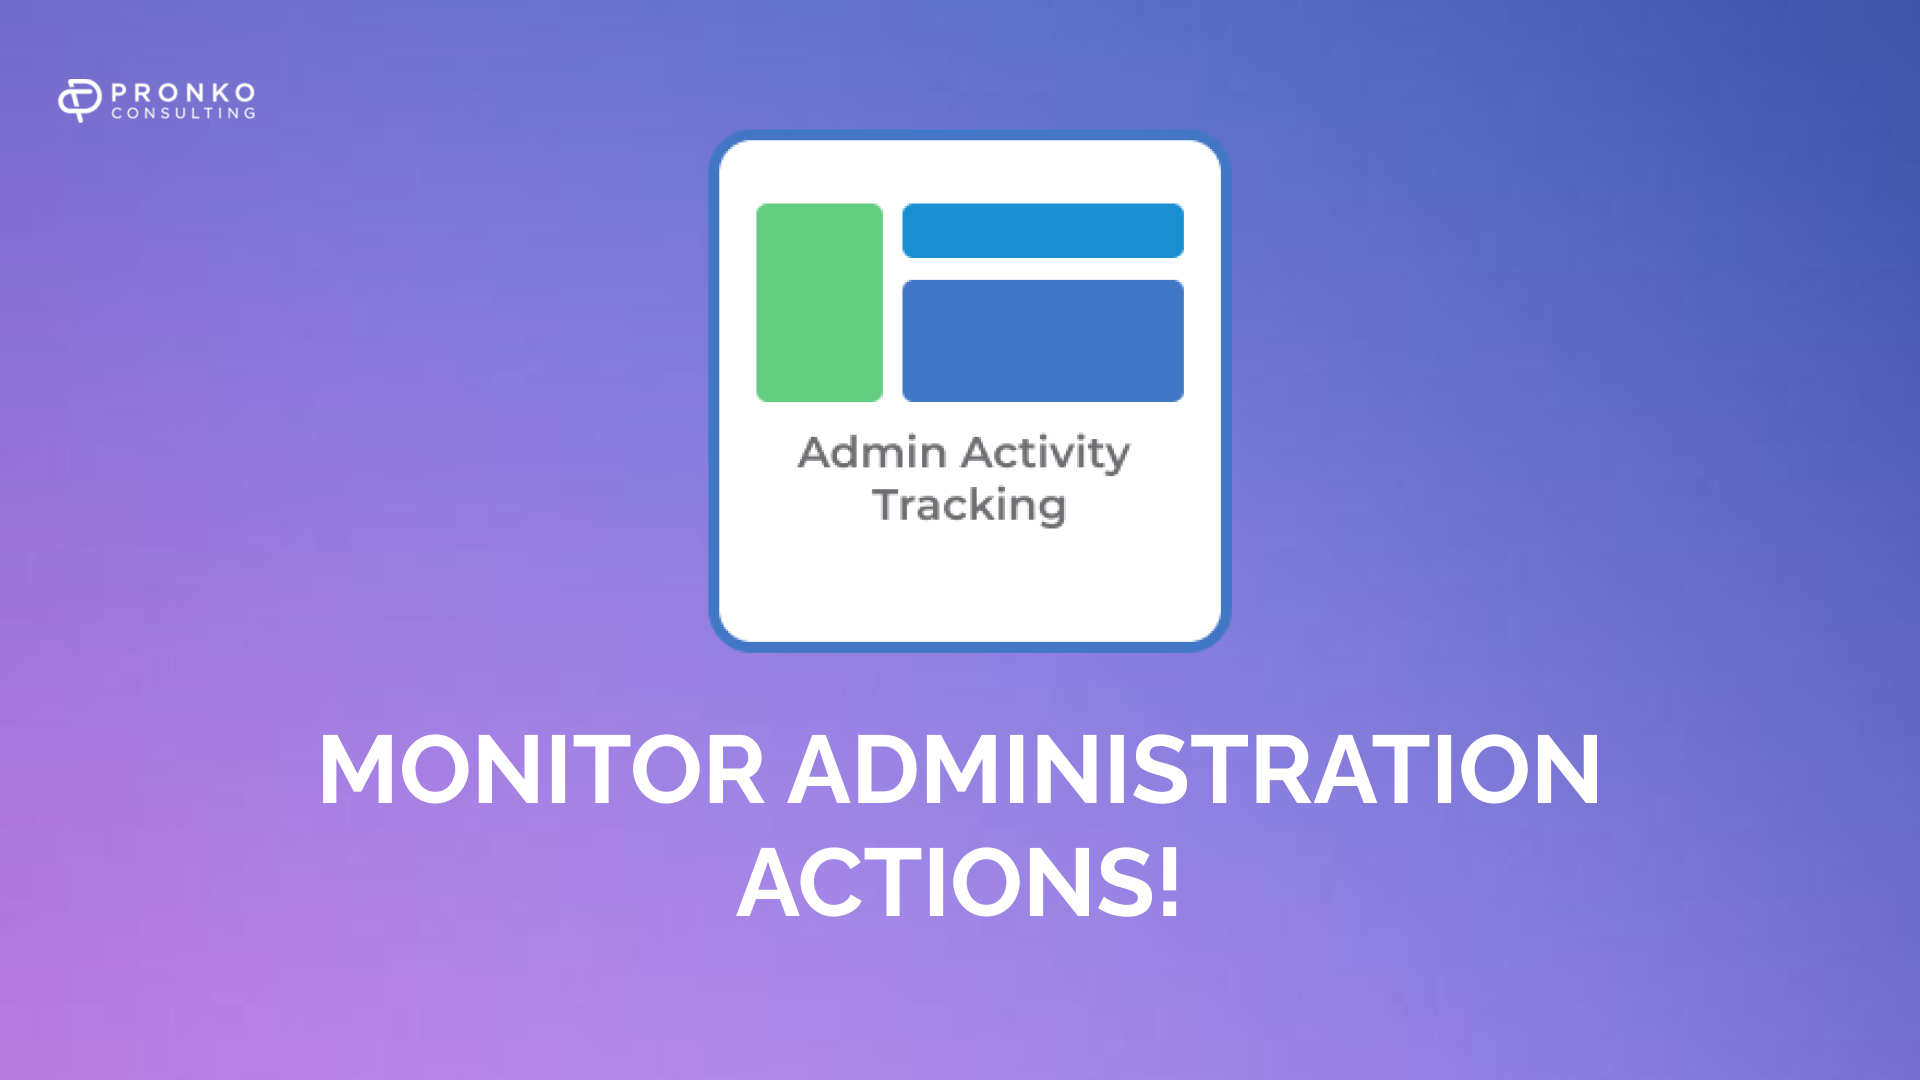 How do you monitor the activity of user administrators?